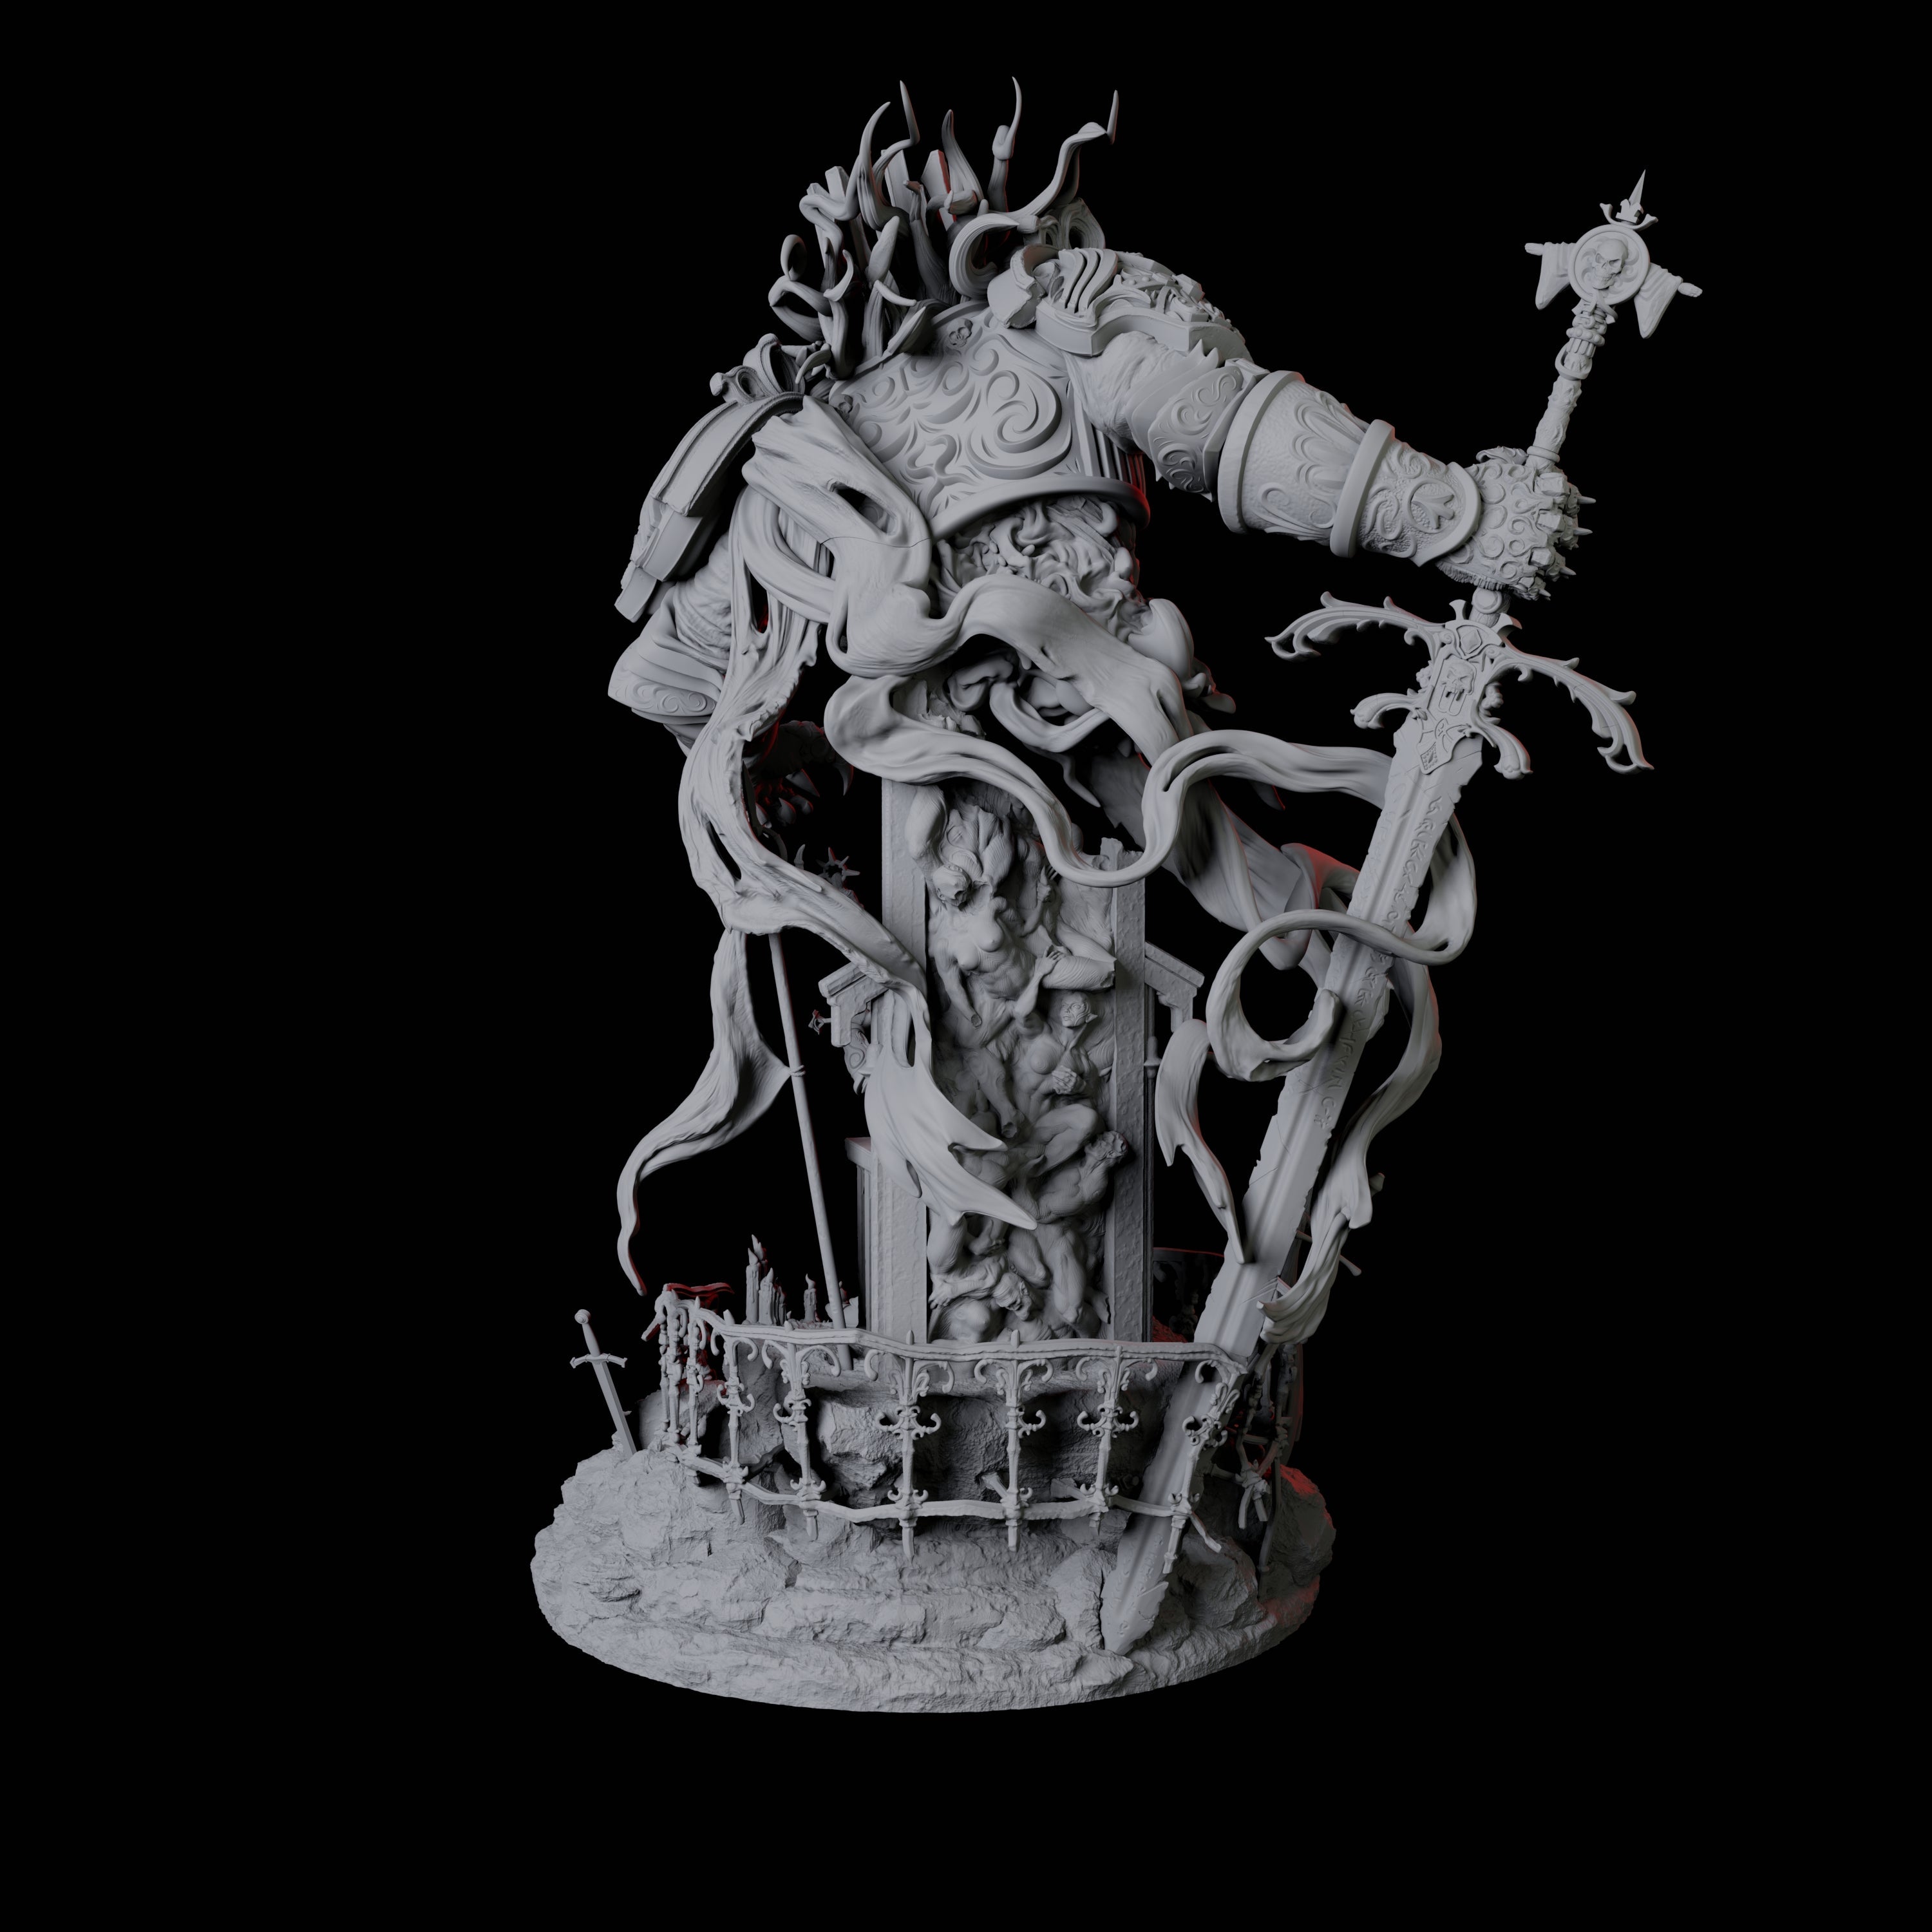 Armoured King on Throne with Lich Miniature for Dungeons and Dragons, Pathfinder or other TTRPGs